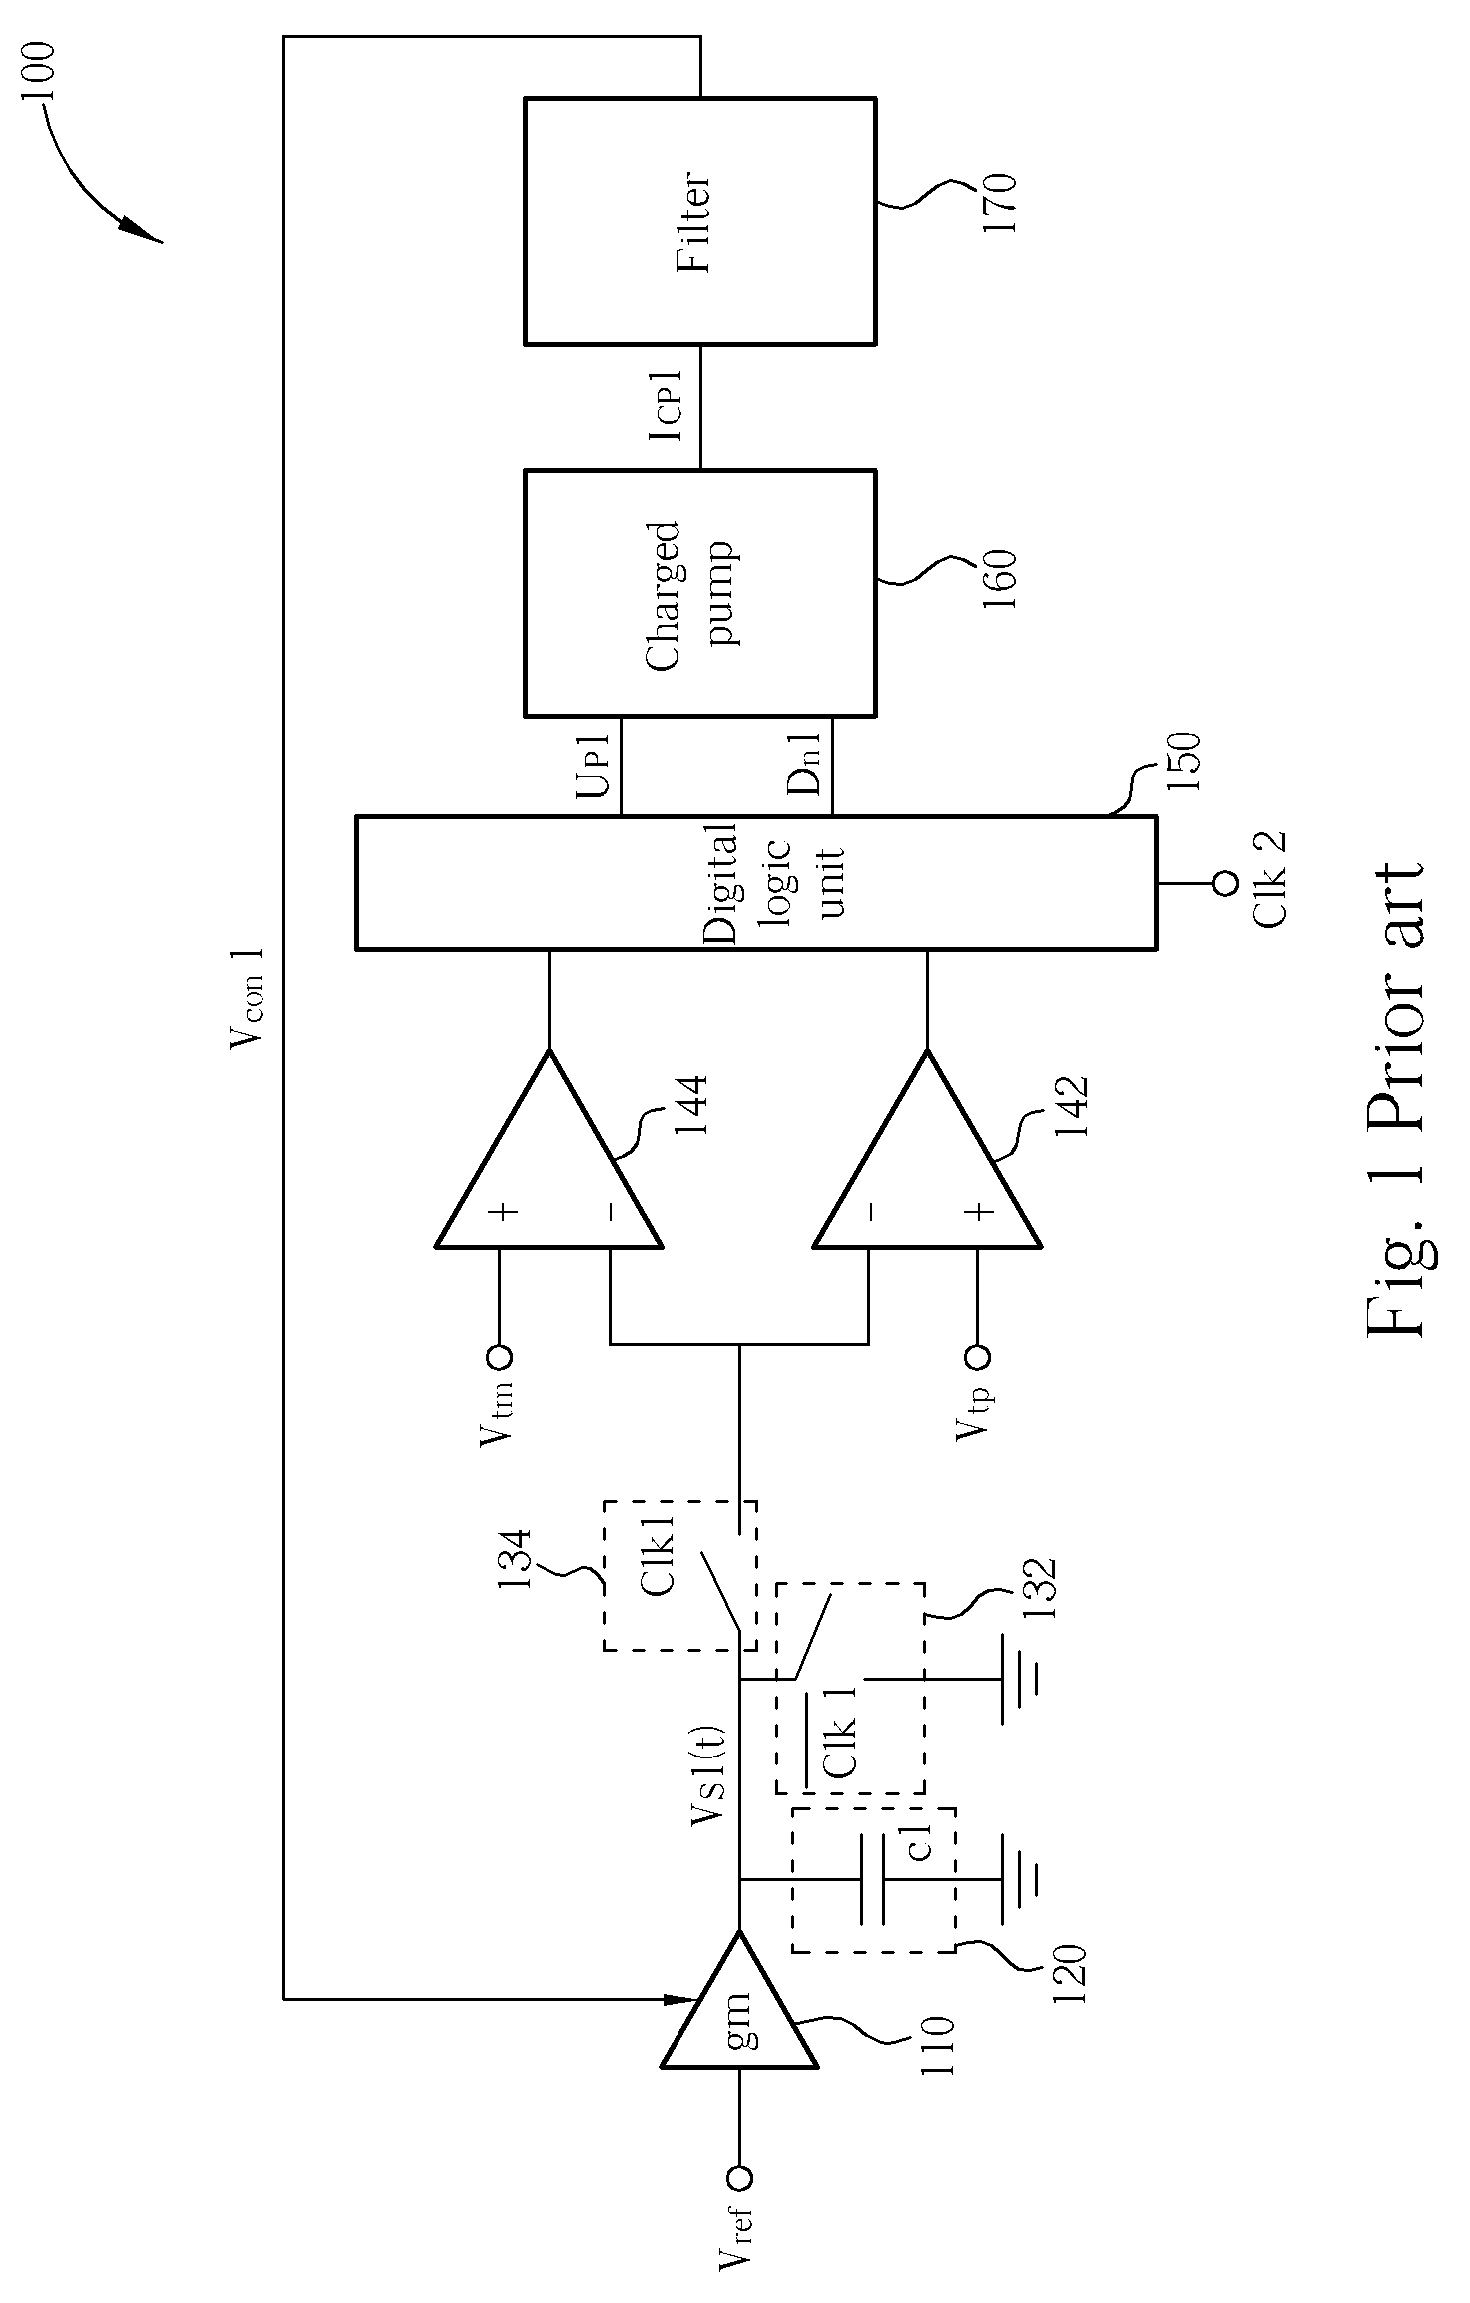 Gm-C Time Constant Tuning Circuit